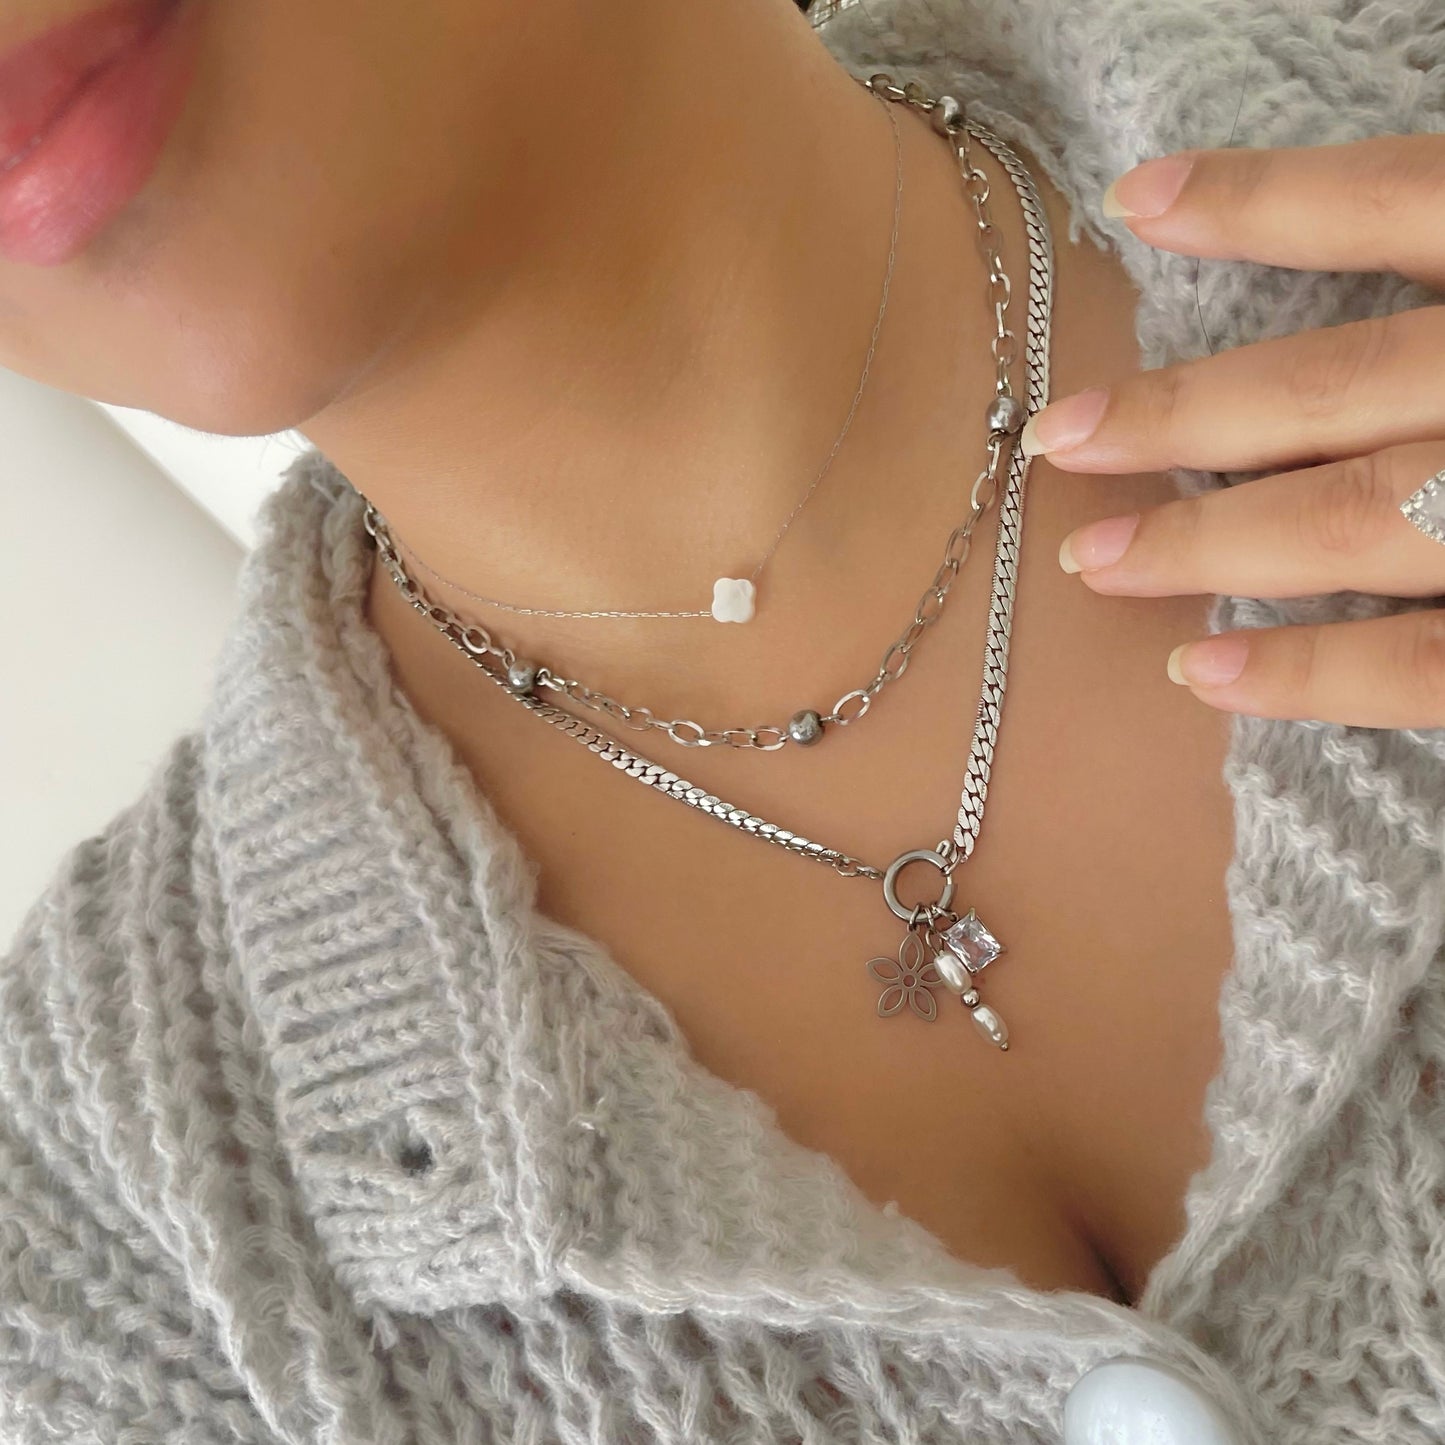 Floating Clover Necklace Silver